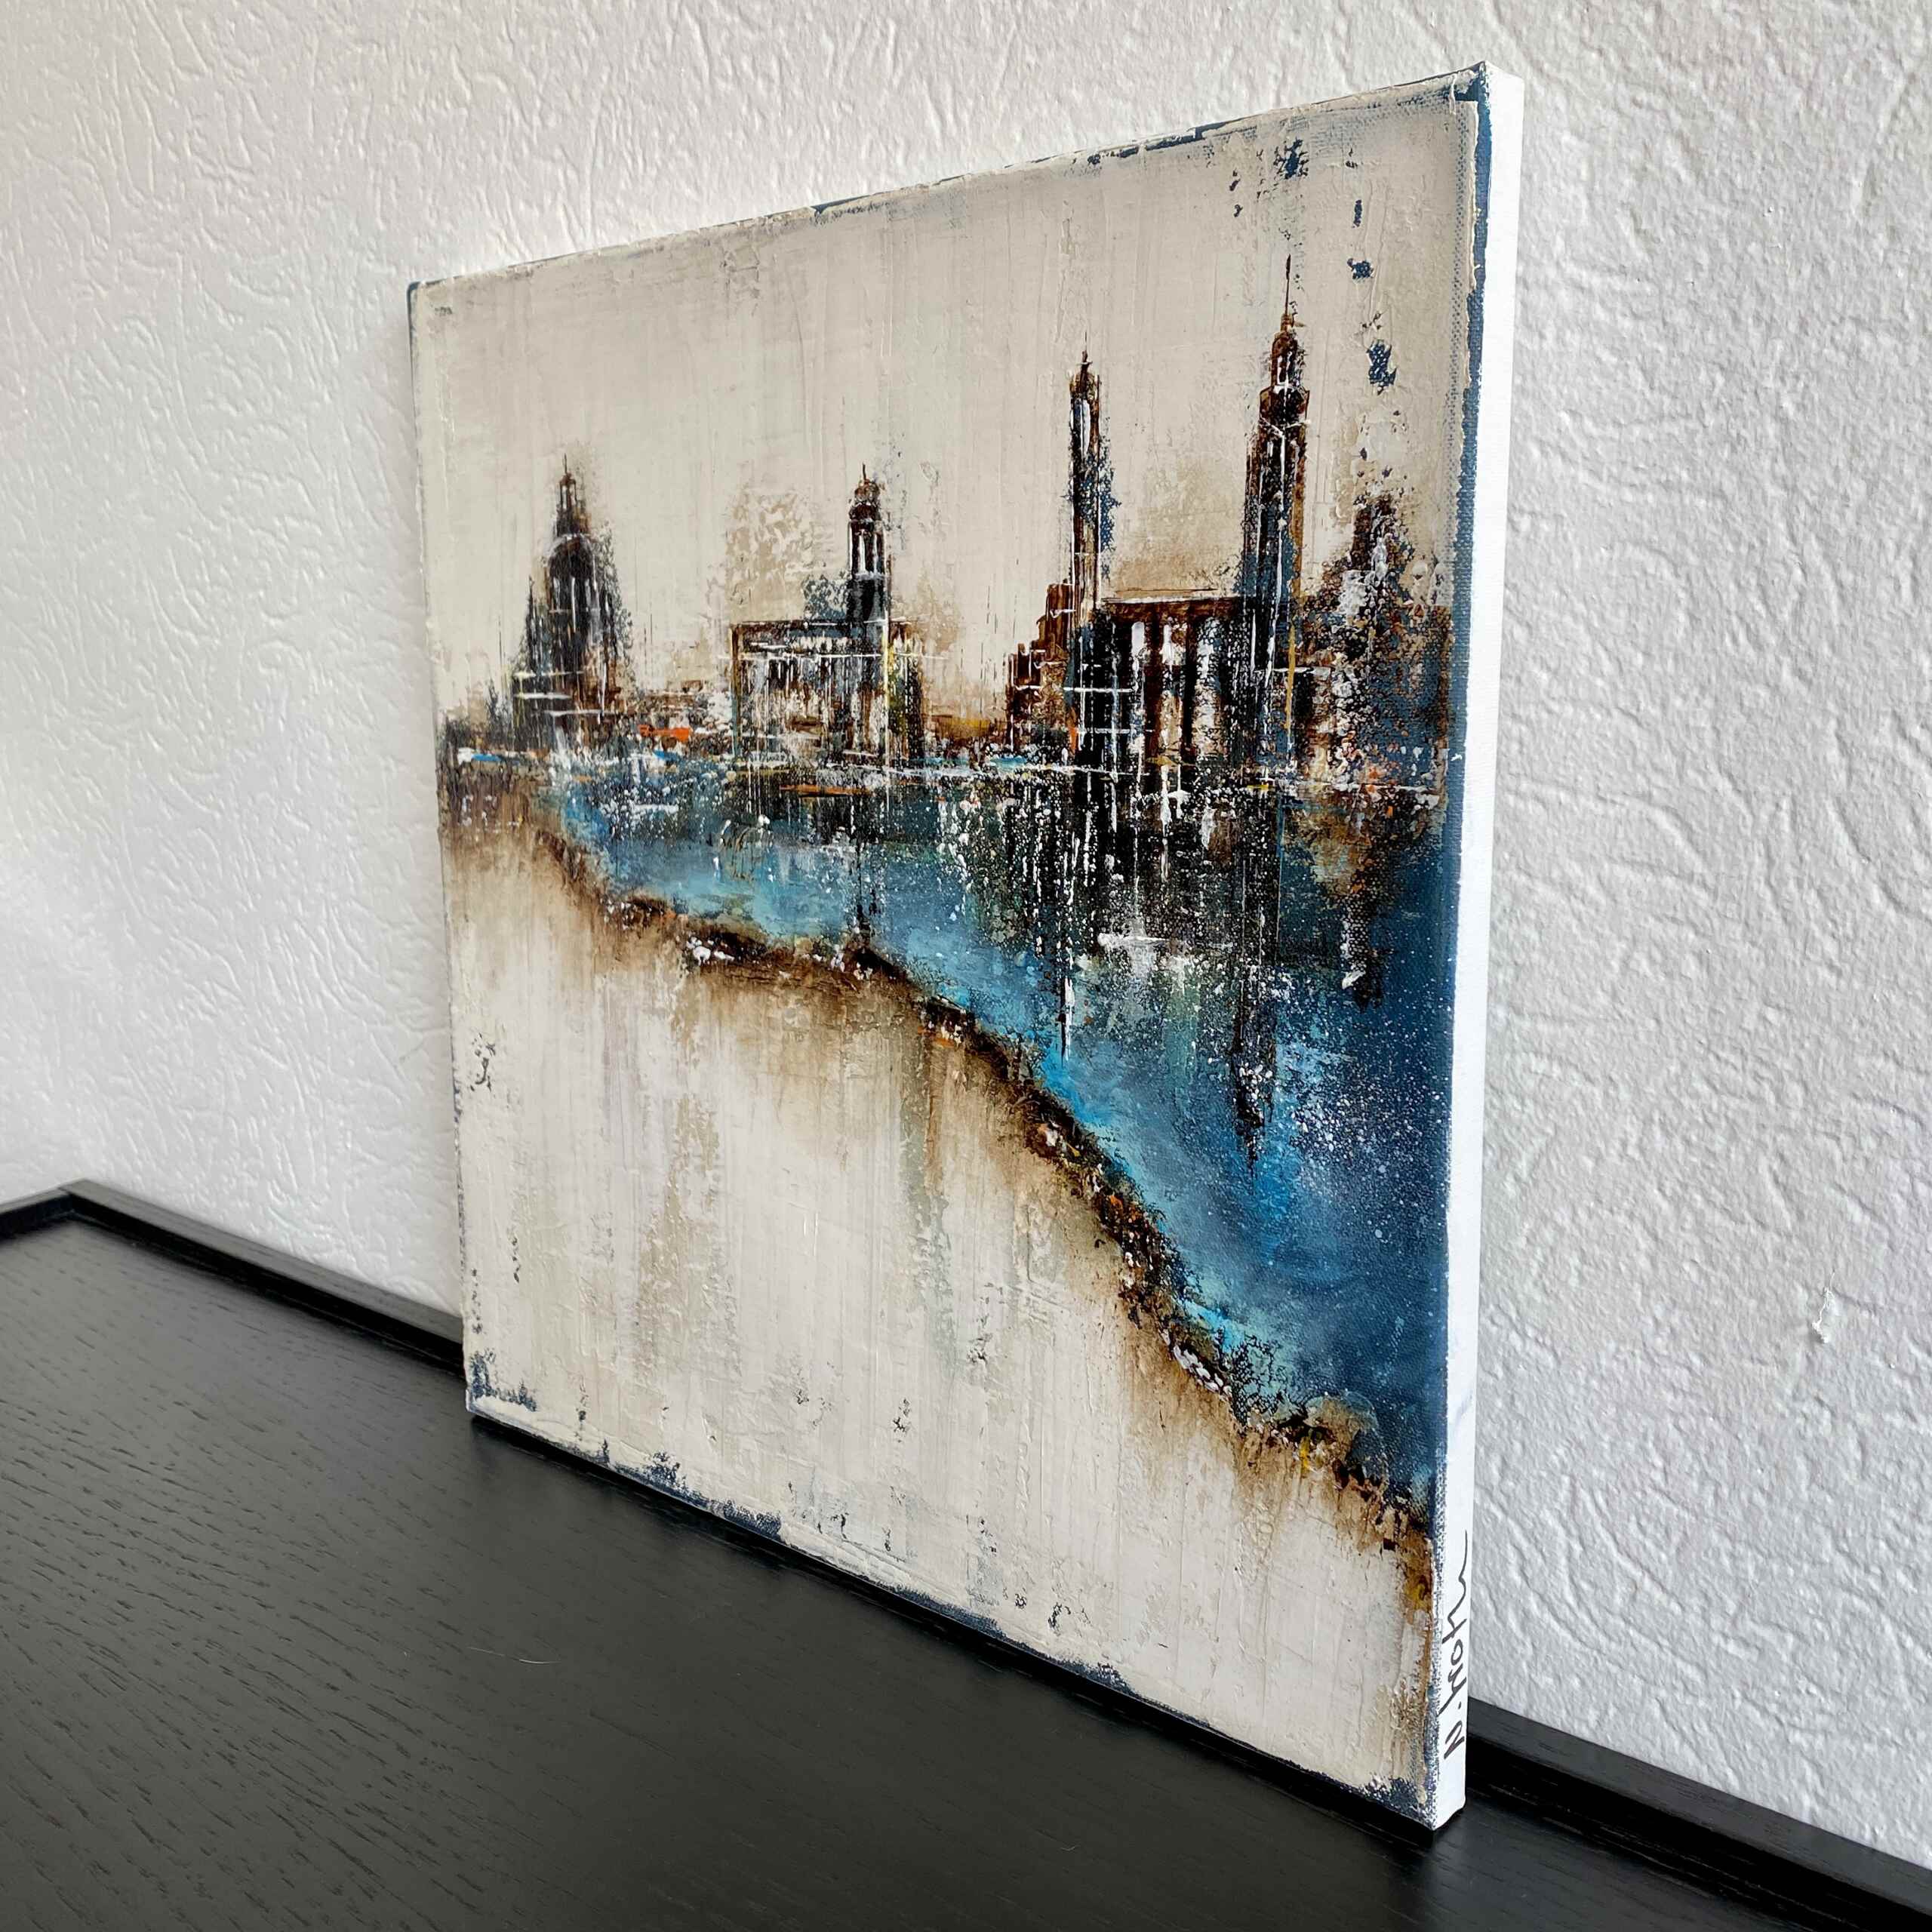 Side view of artwork "Elbe Impressions No 2" by Nina Groth